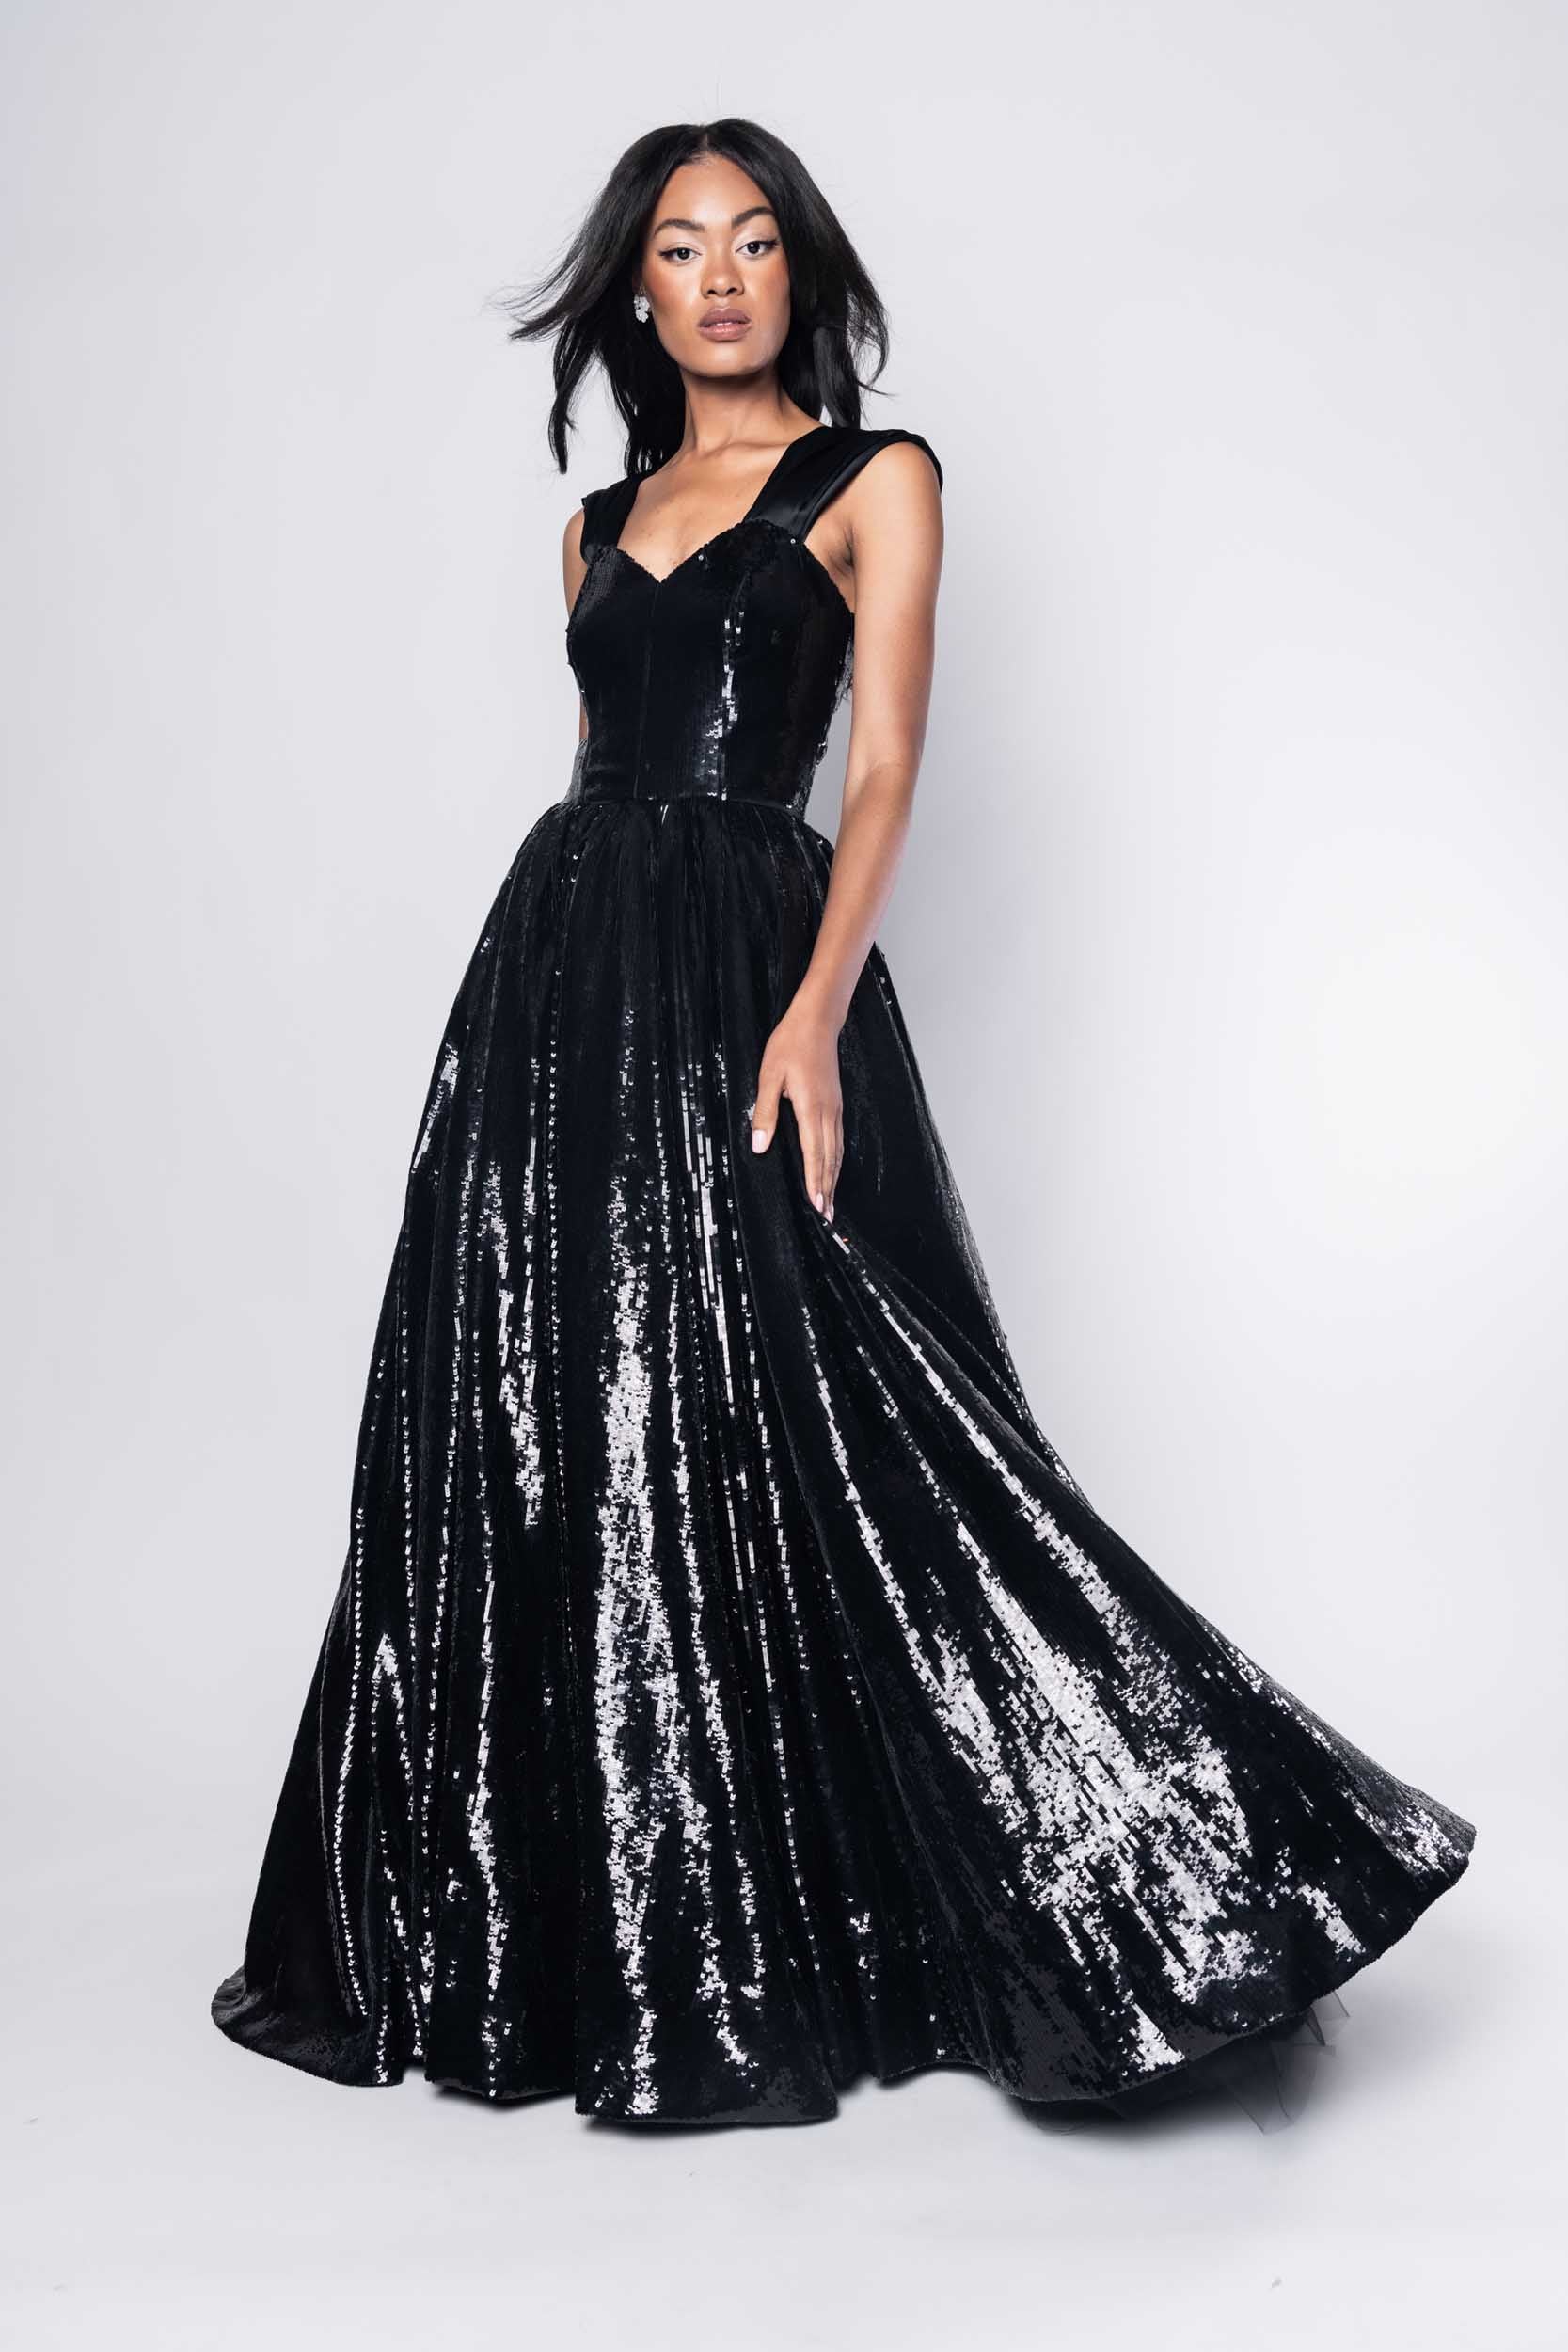 Beautiful model in an sequined, floor-length Sujata Gazder ball gown - front view movement